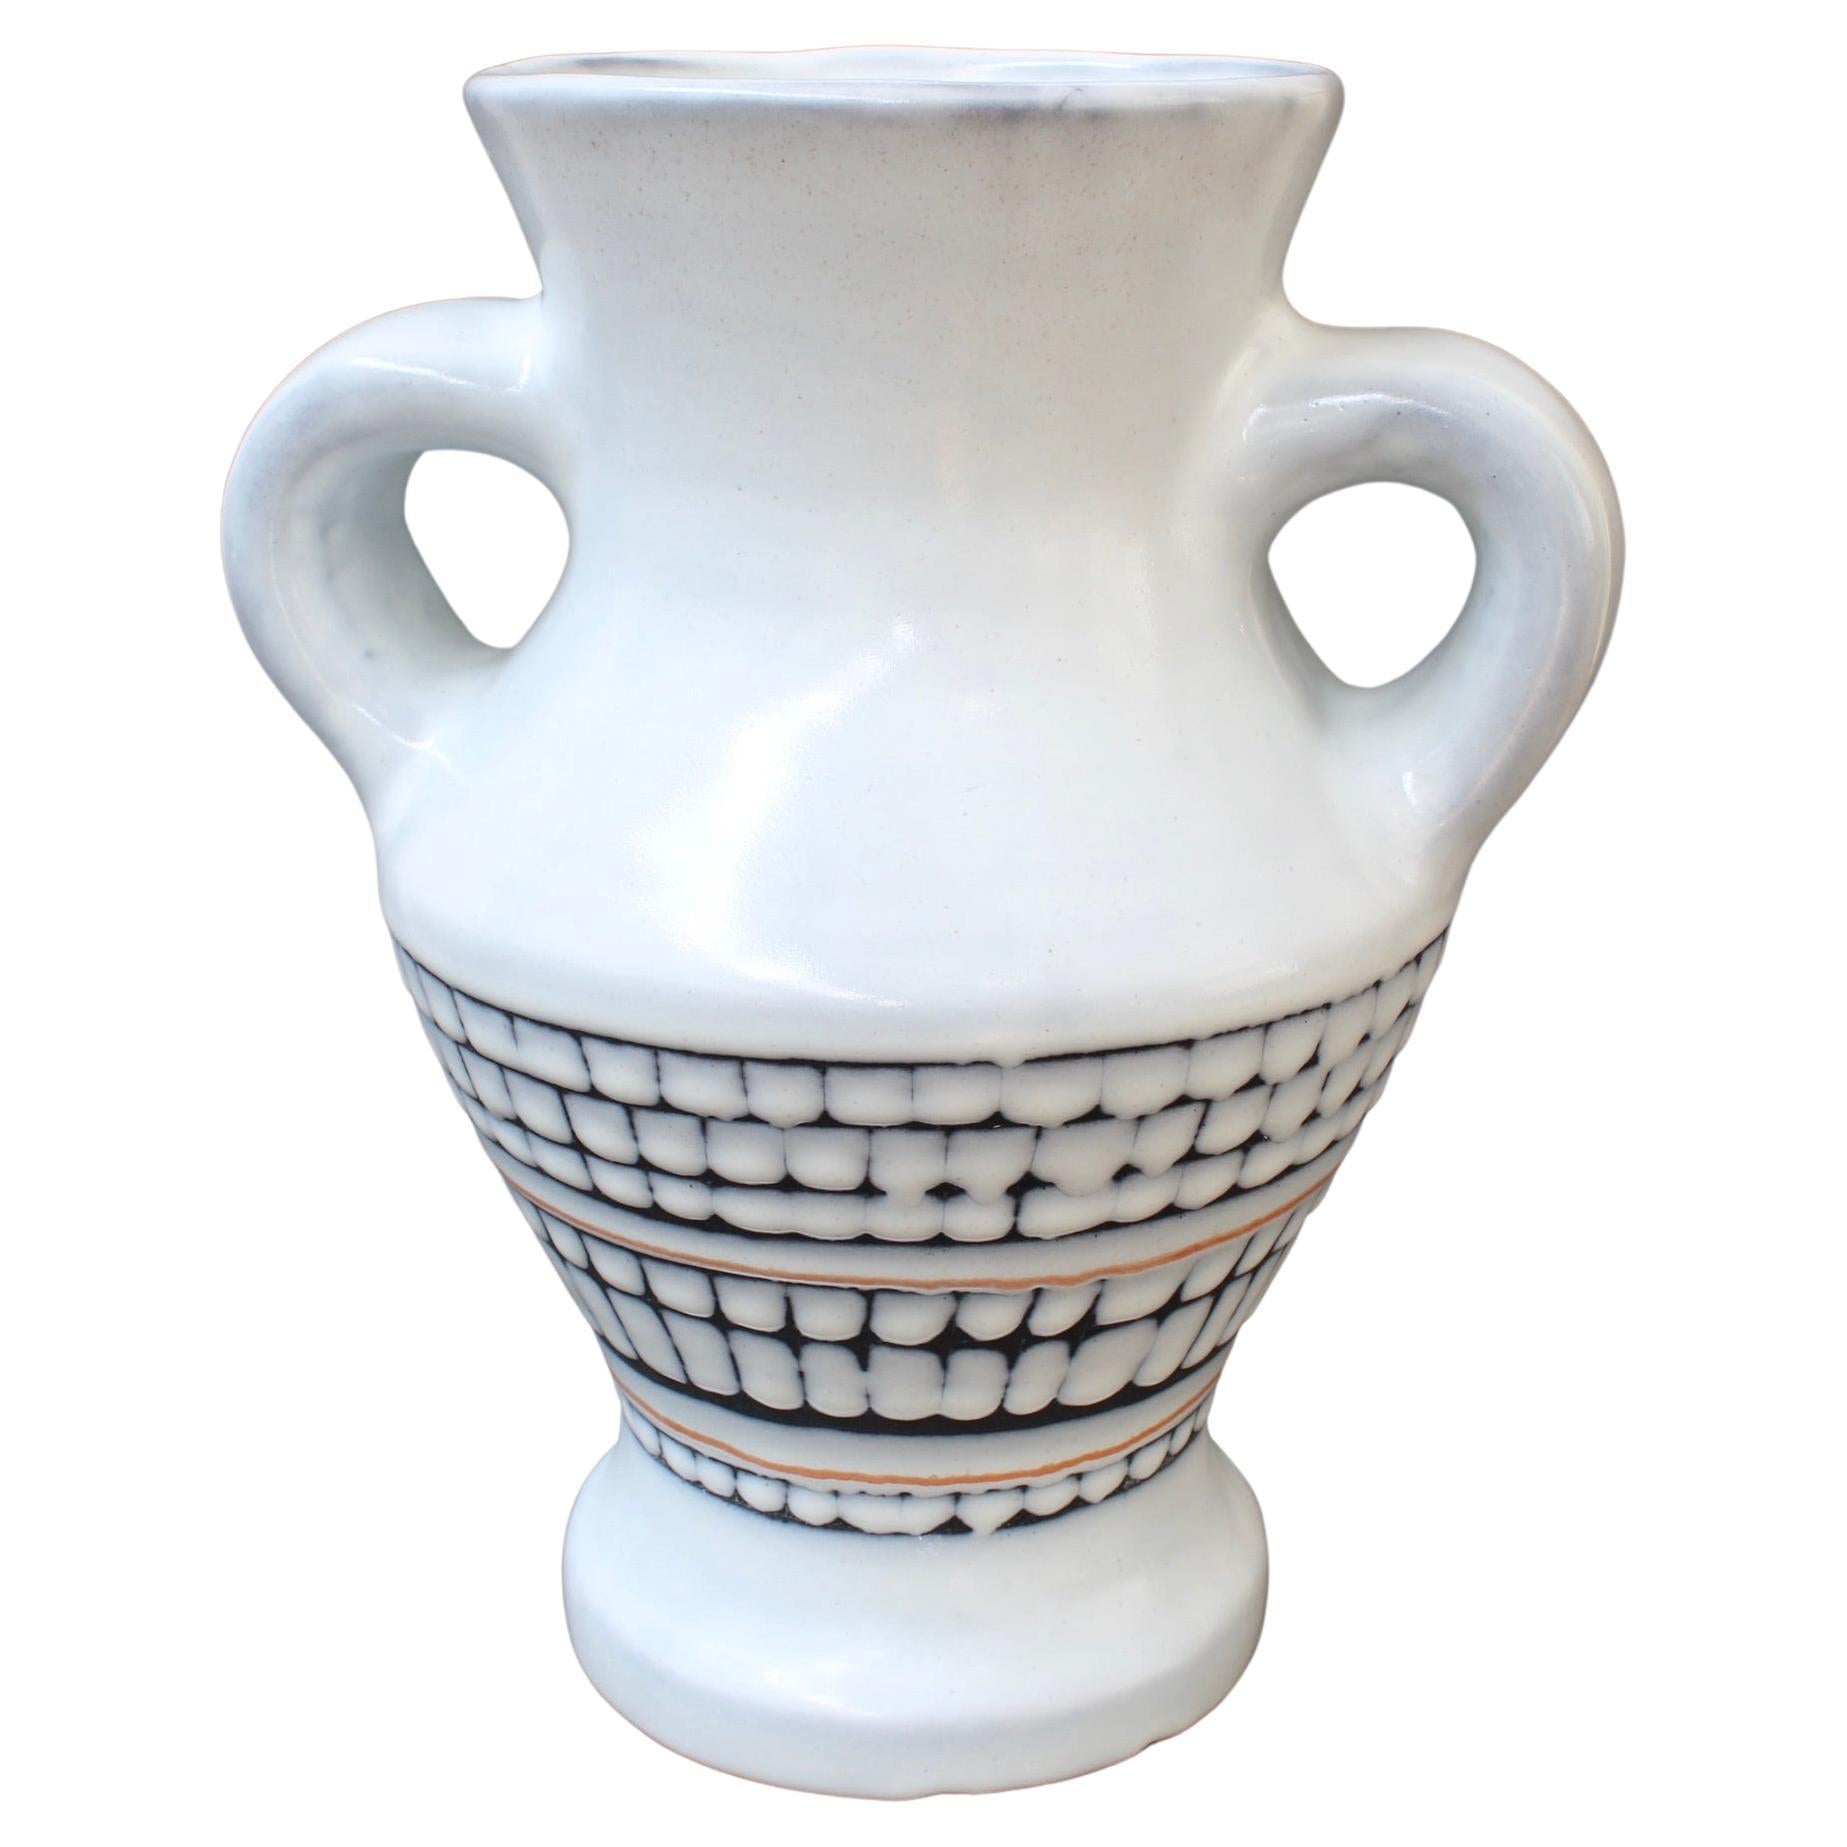 Vintage French Ceramic Vase with Handles by Roger Capron, 'circa 1950s' For Sale